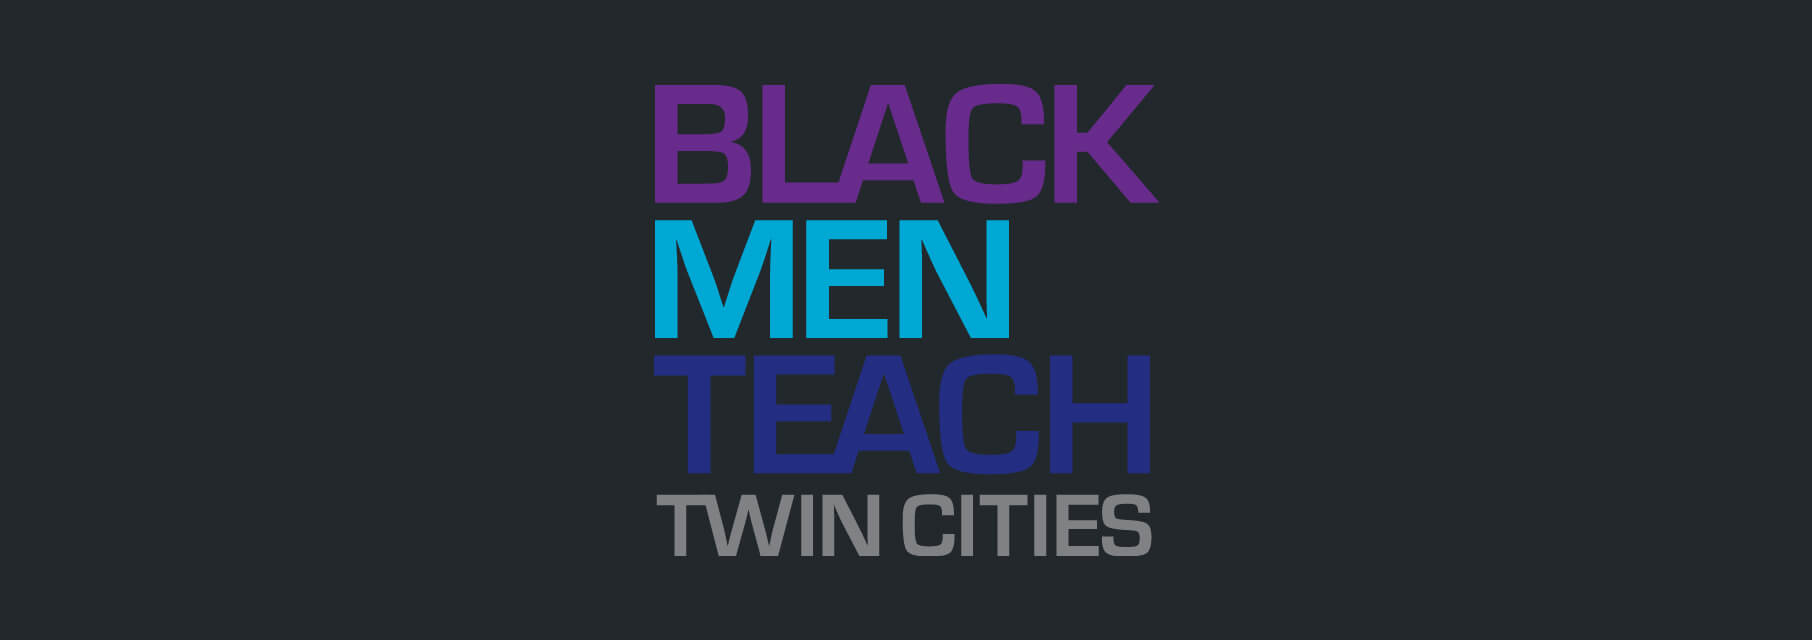 Periscope and Black Men Teach Join Forces for Important Cause | Periscope